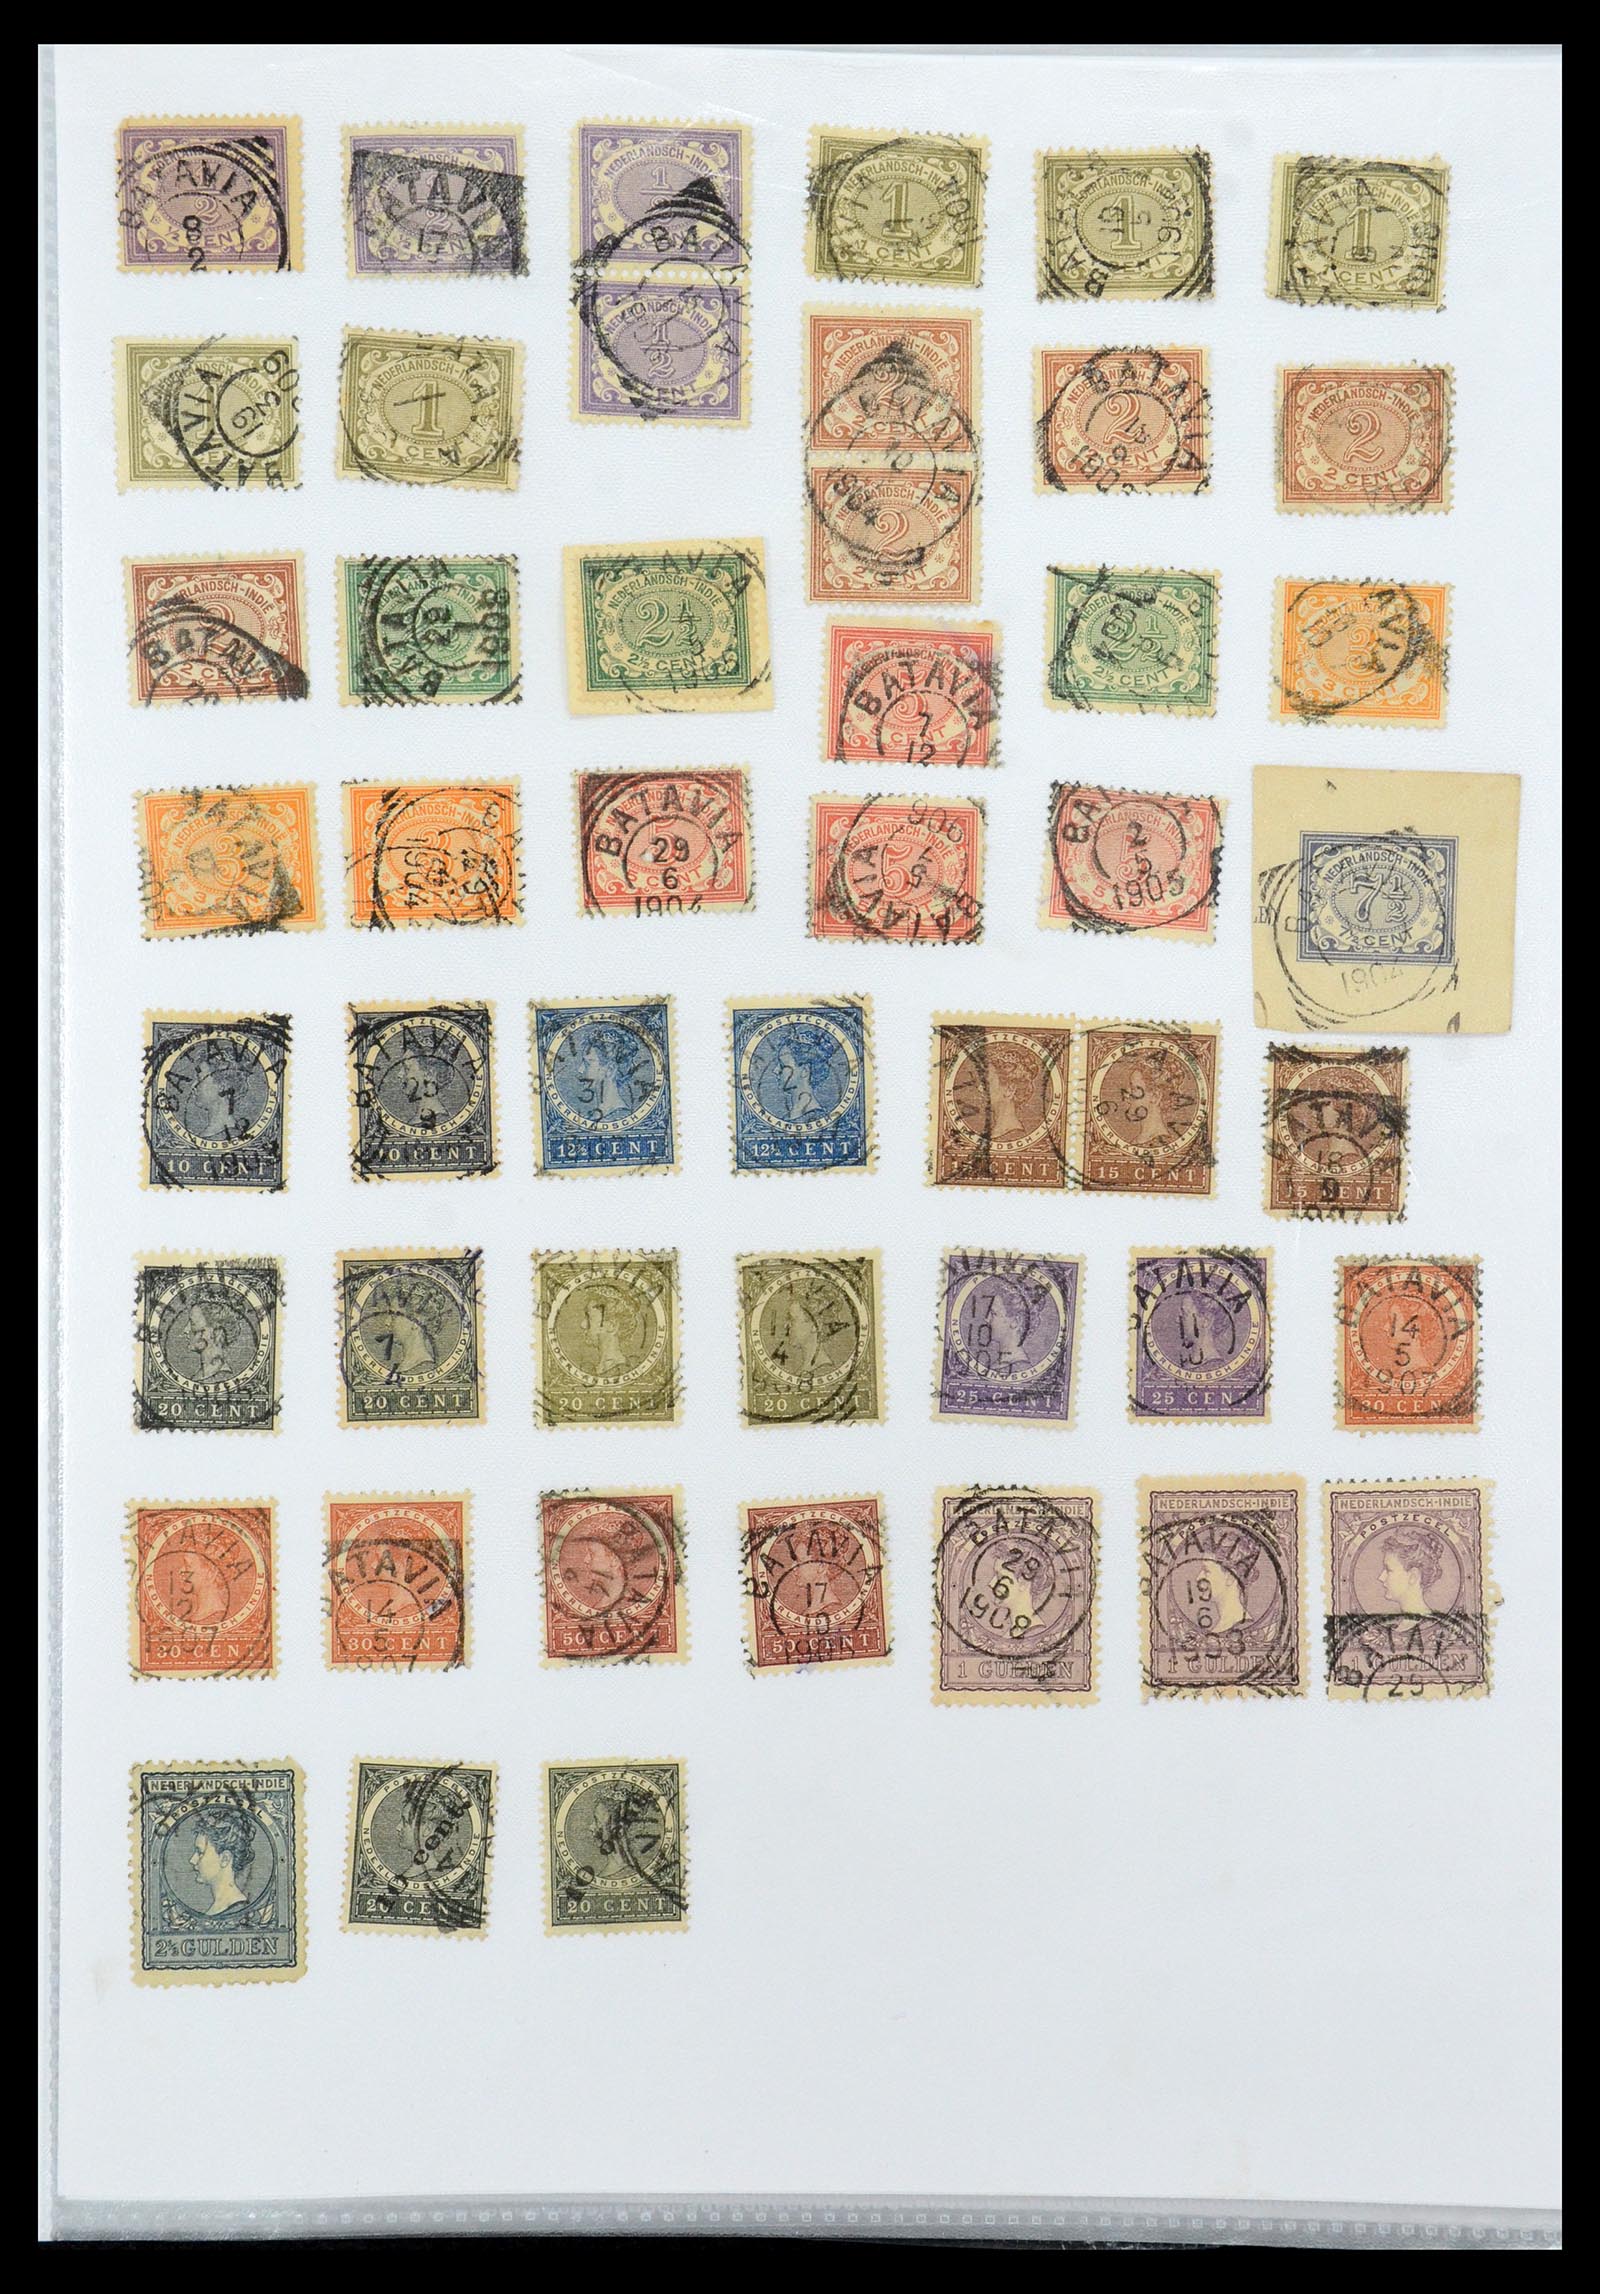 36432 023 - Stamp collection 36432 Dutch east Indies square cancels.